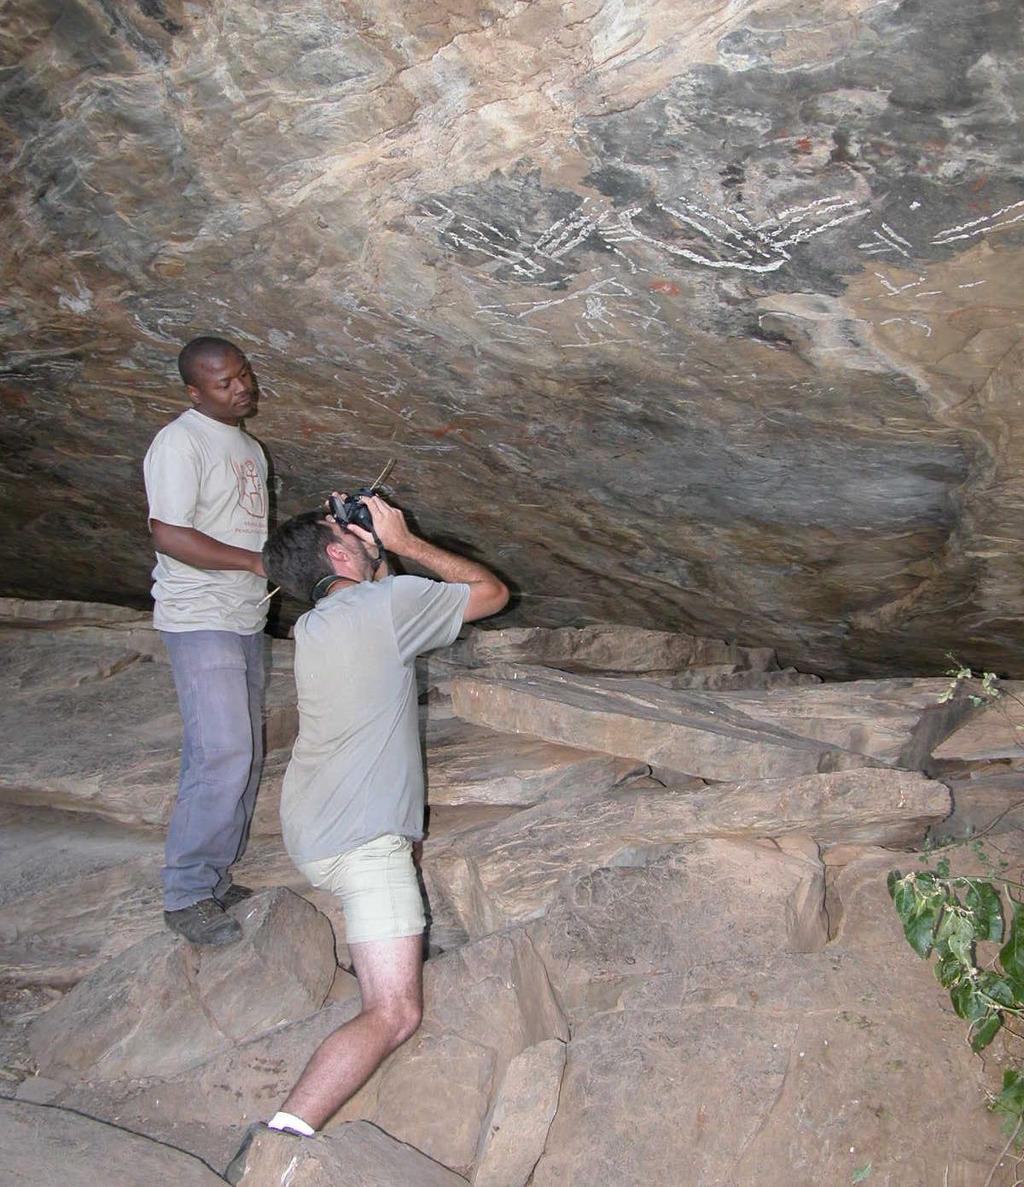 African Rock Art Research In the